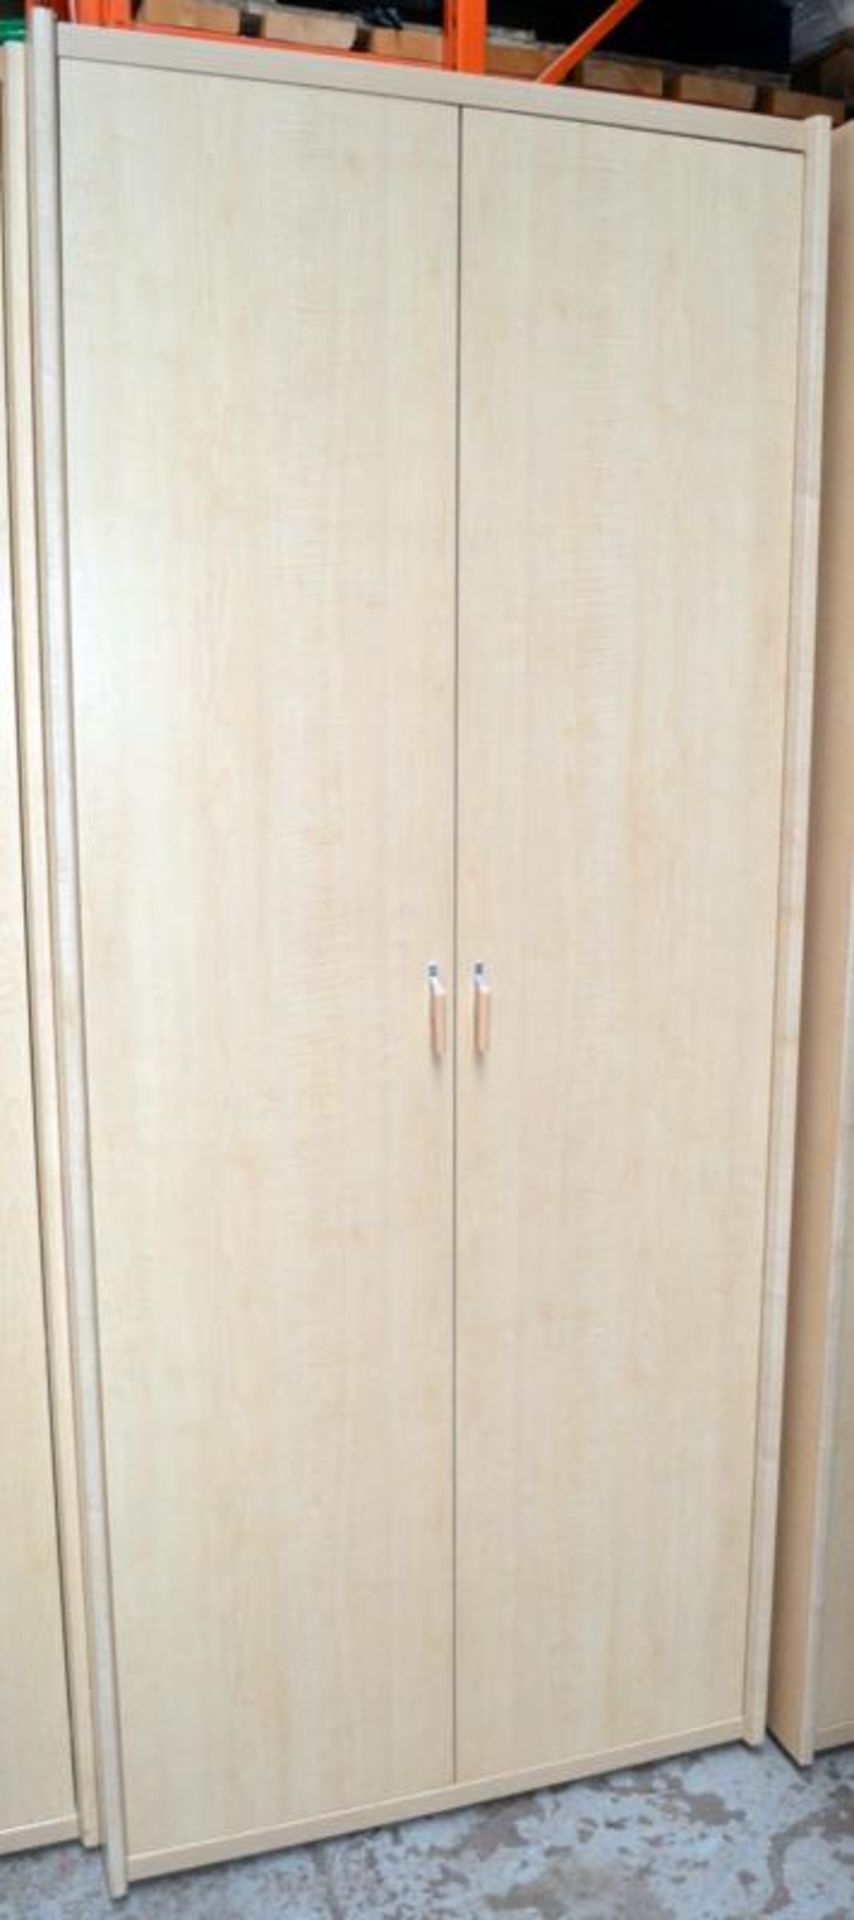 1 x GAUTIER Tall Wardrobe With A Natural Oak Style Finish - Made In France - Dimensions: H222 x W93. - Bild 3 aus 9